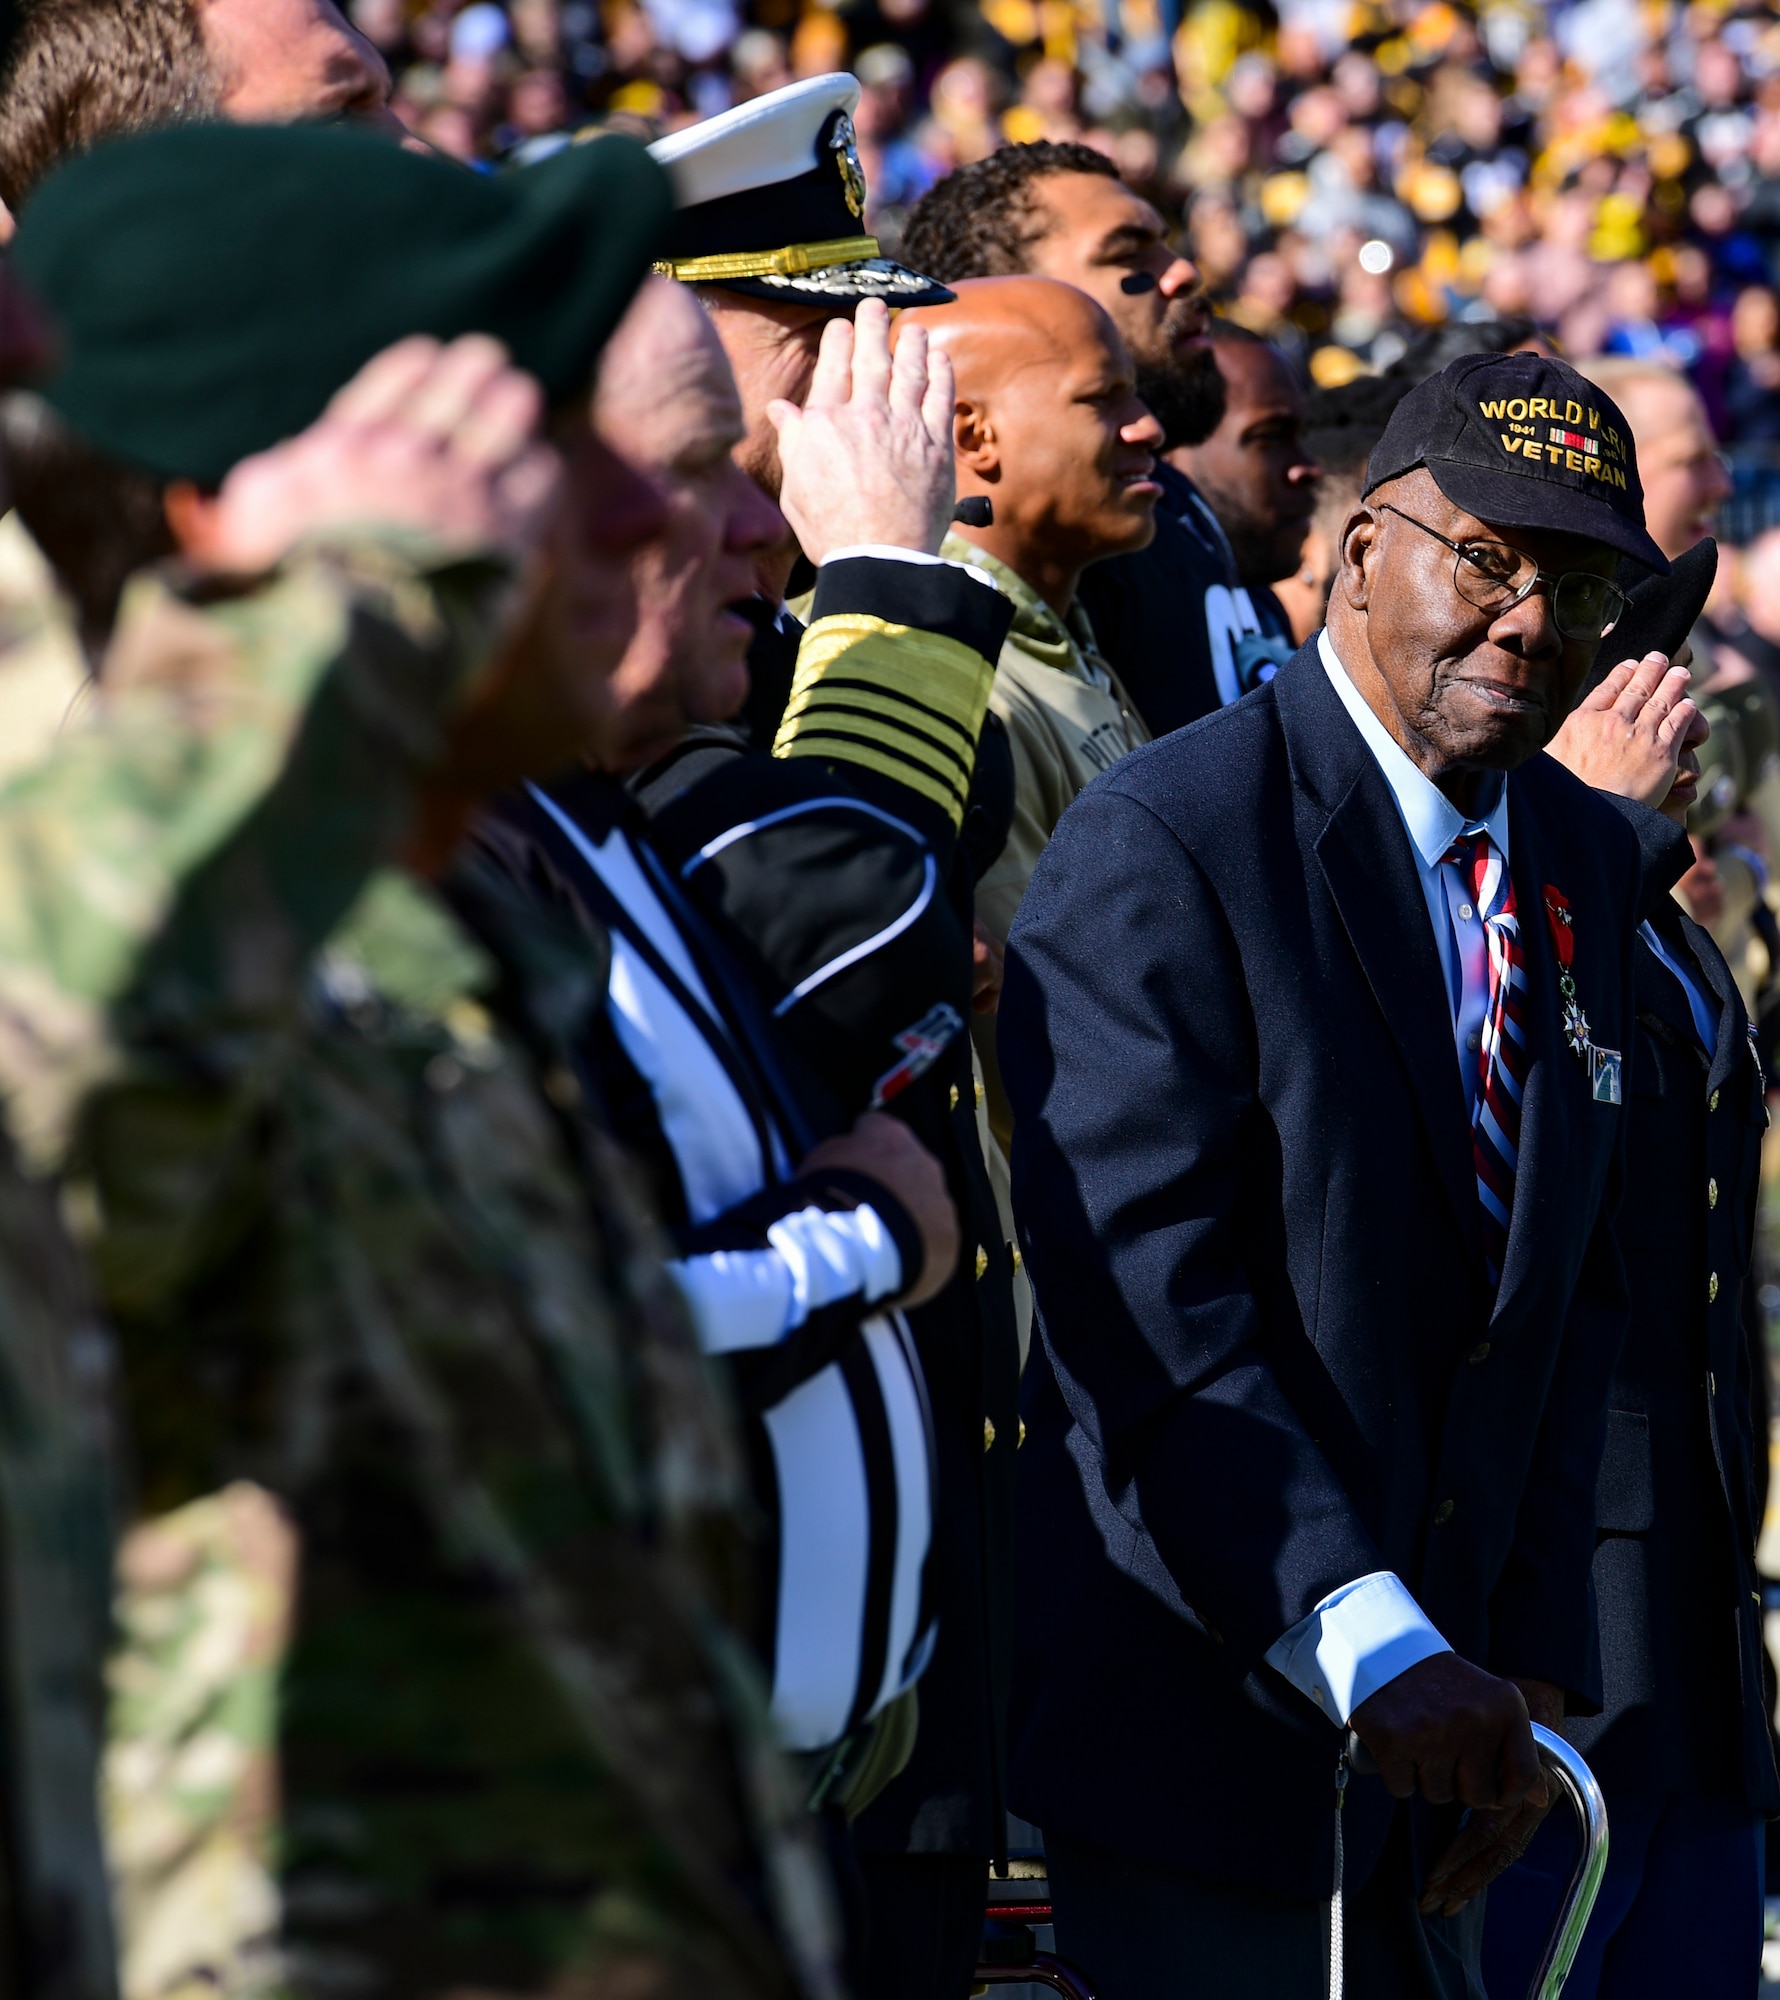 World War II veteran Henry Parham looks on as Admiral Craig S. Faller, U.S. Navy Southern Command combatant commander and members of the U.S. Army salute during the National Anthem at a Pittsburgh Steelers vs. Indianapolis Colts game at Heinz Field in Pittsburgh, Pennsylvania, November 3, 2019.